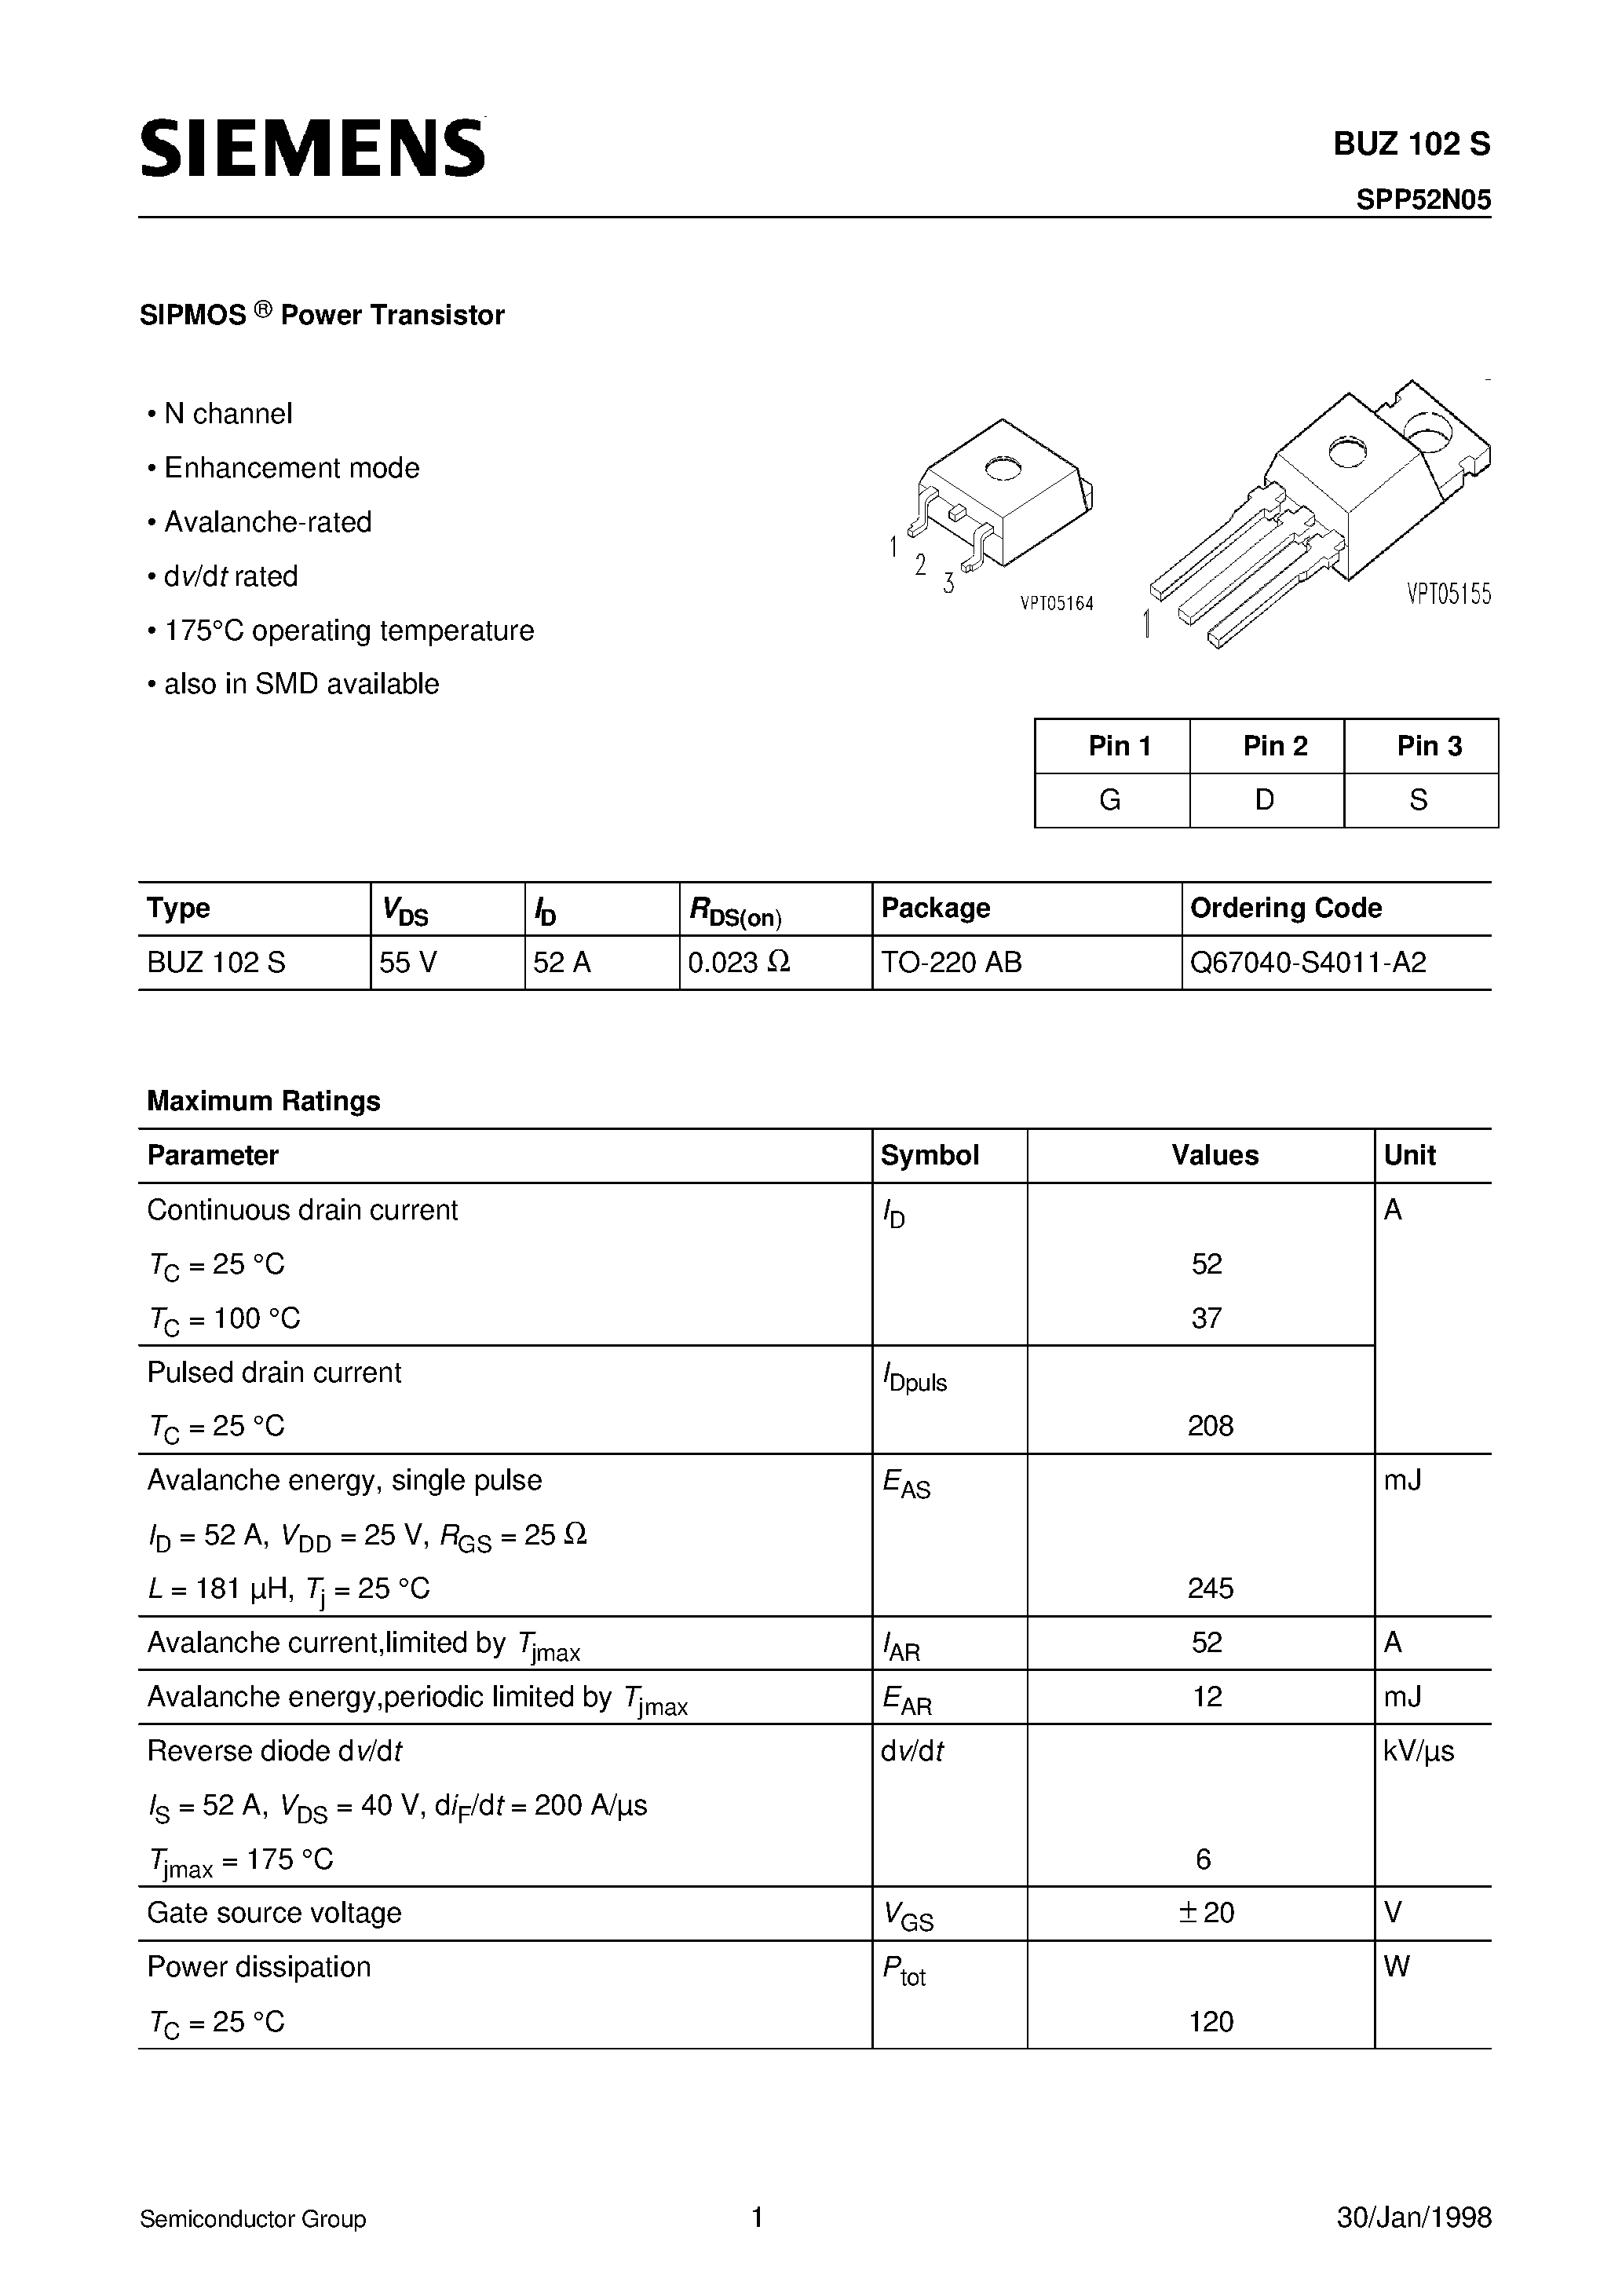 Datasheet BUZ102S - SIPMOS Power Transistor (N channel Enhancement mode Avalanche-rated dv/dt rated) page 1